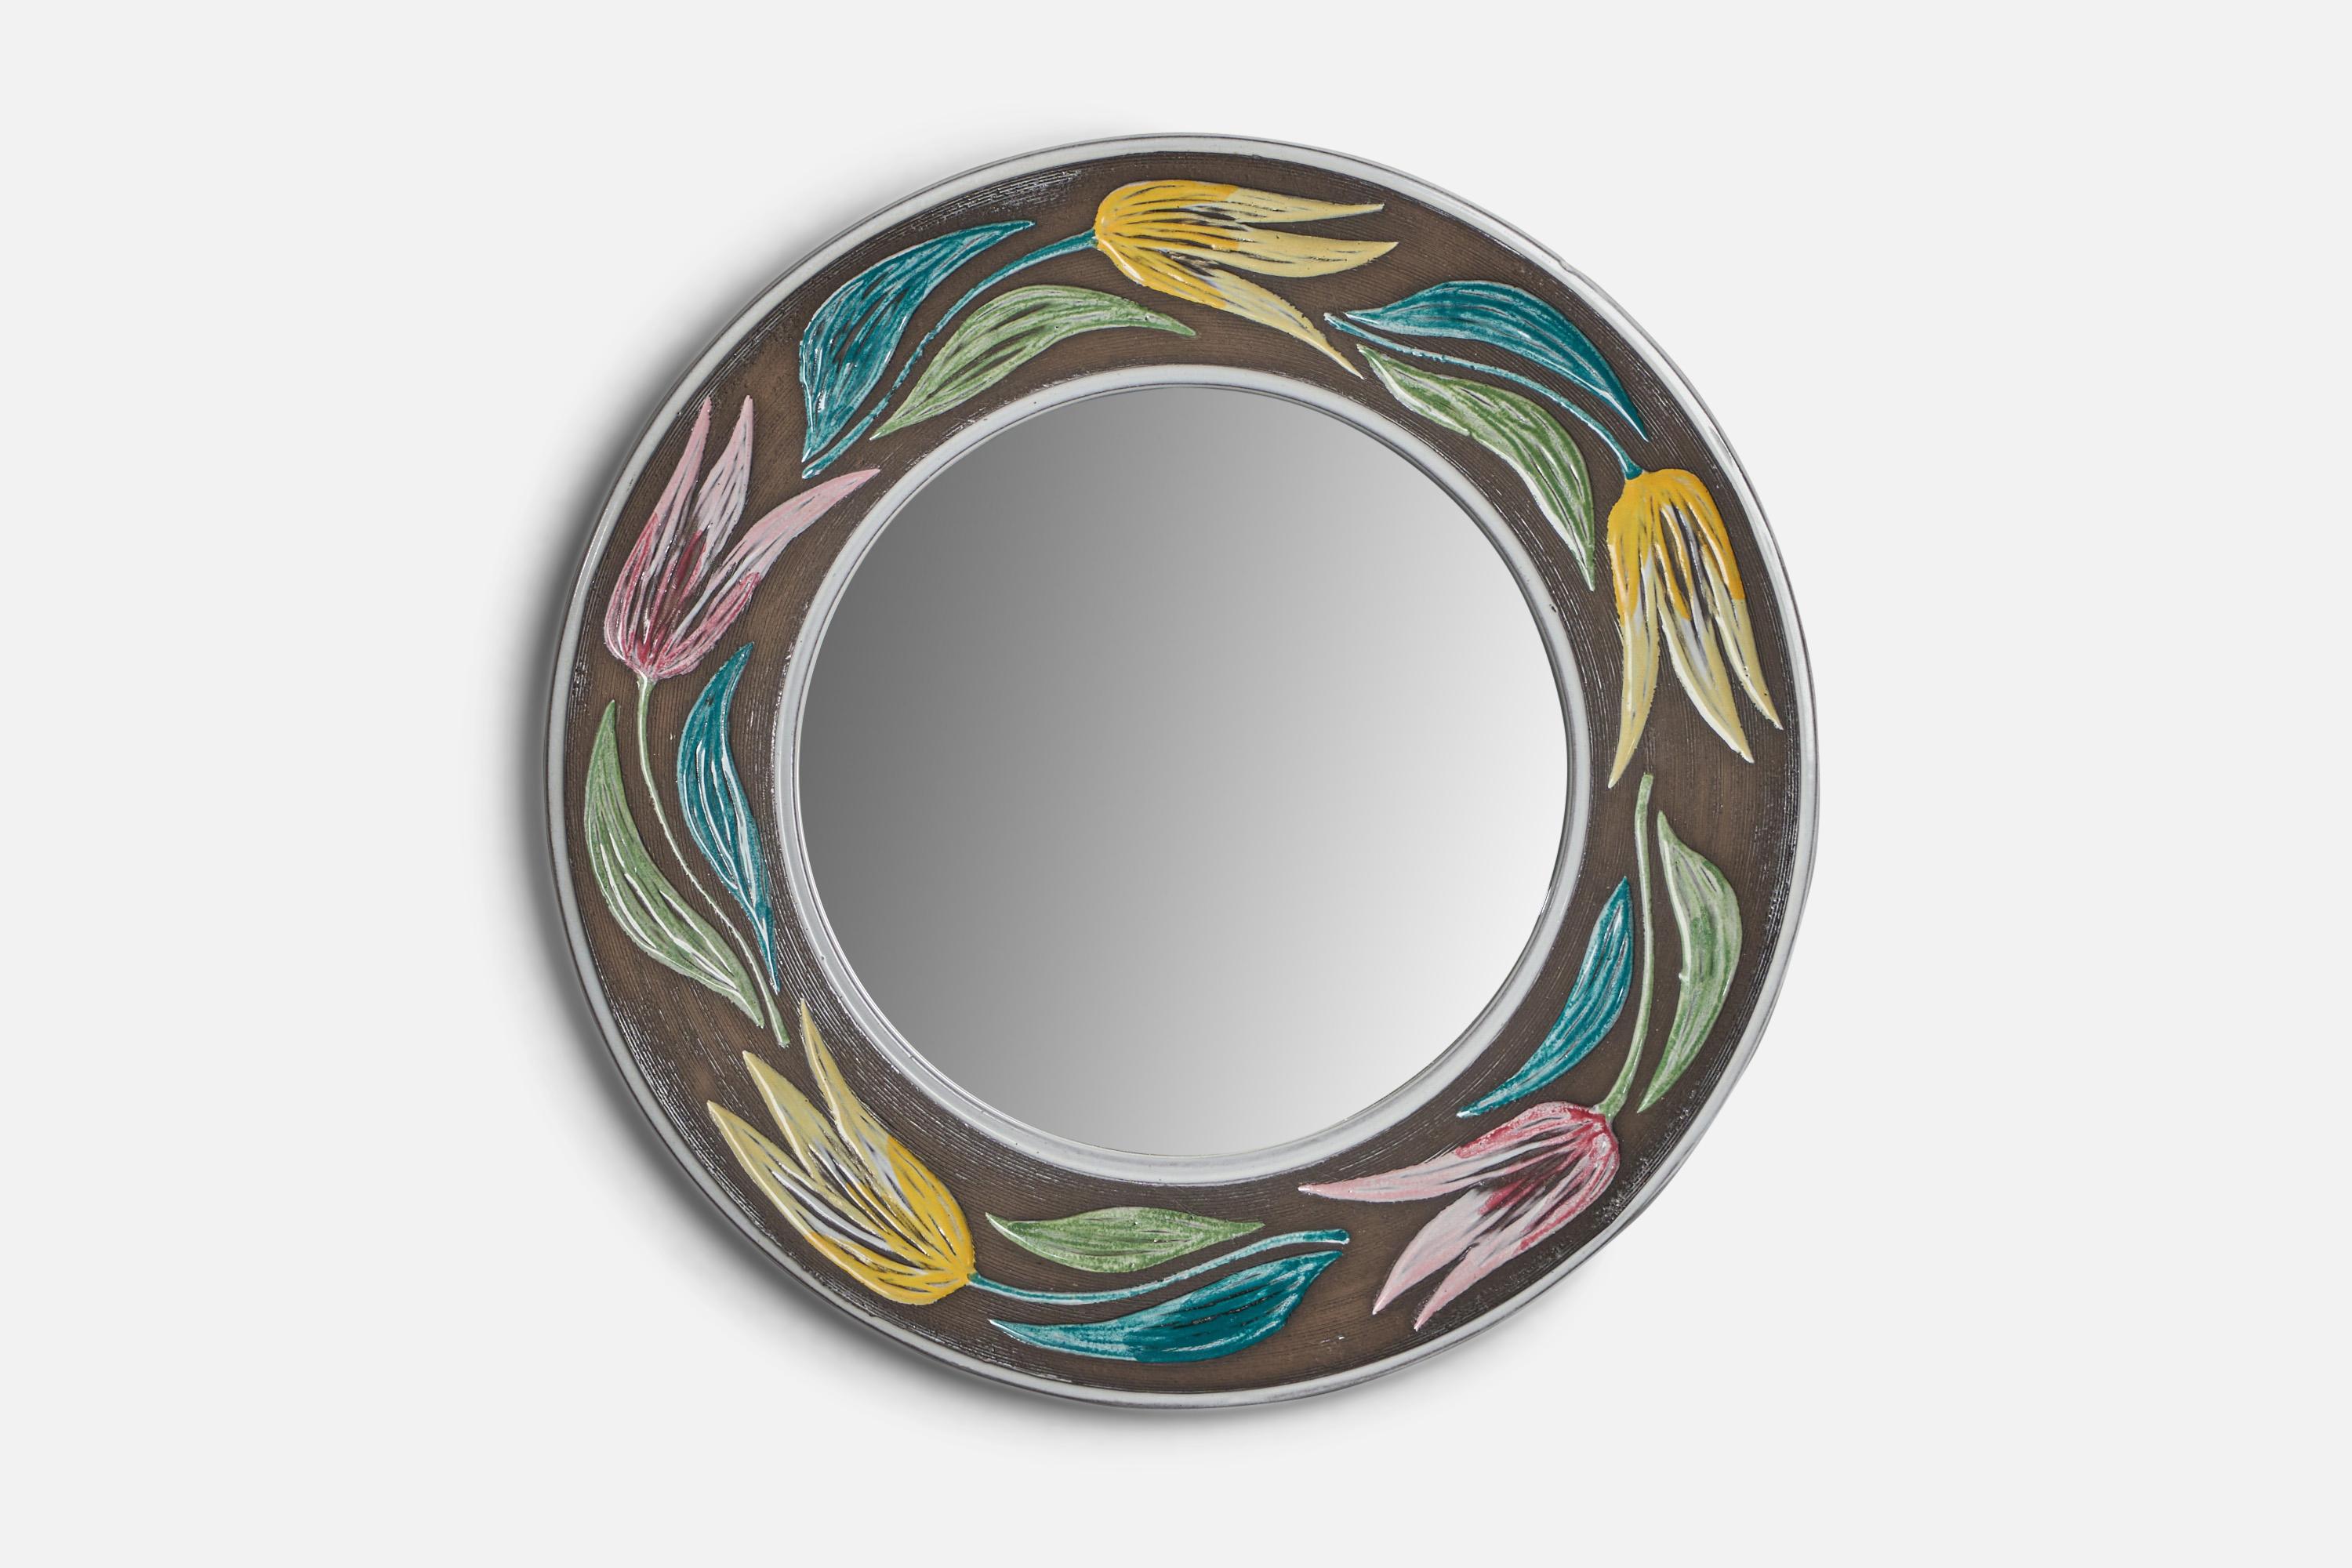 A blue green pink yellow and grey painted ceramic mirror designed by Mari Simmulson and produced by Turitz & Co, Sweden, c. 1960s.